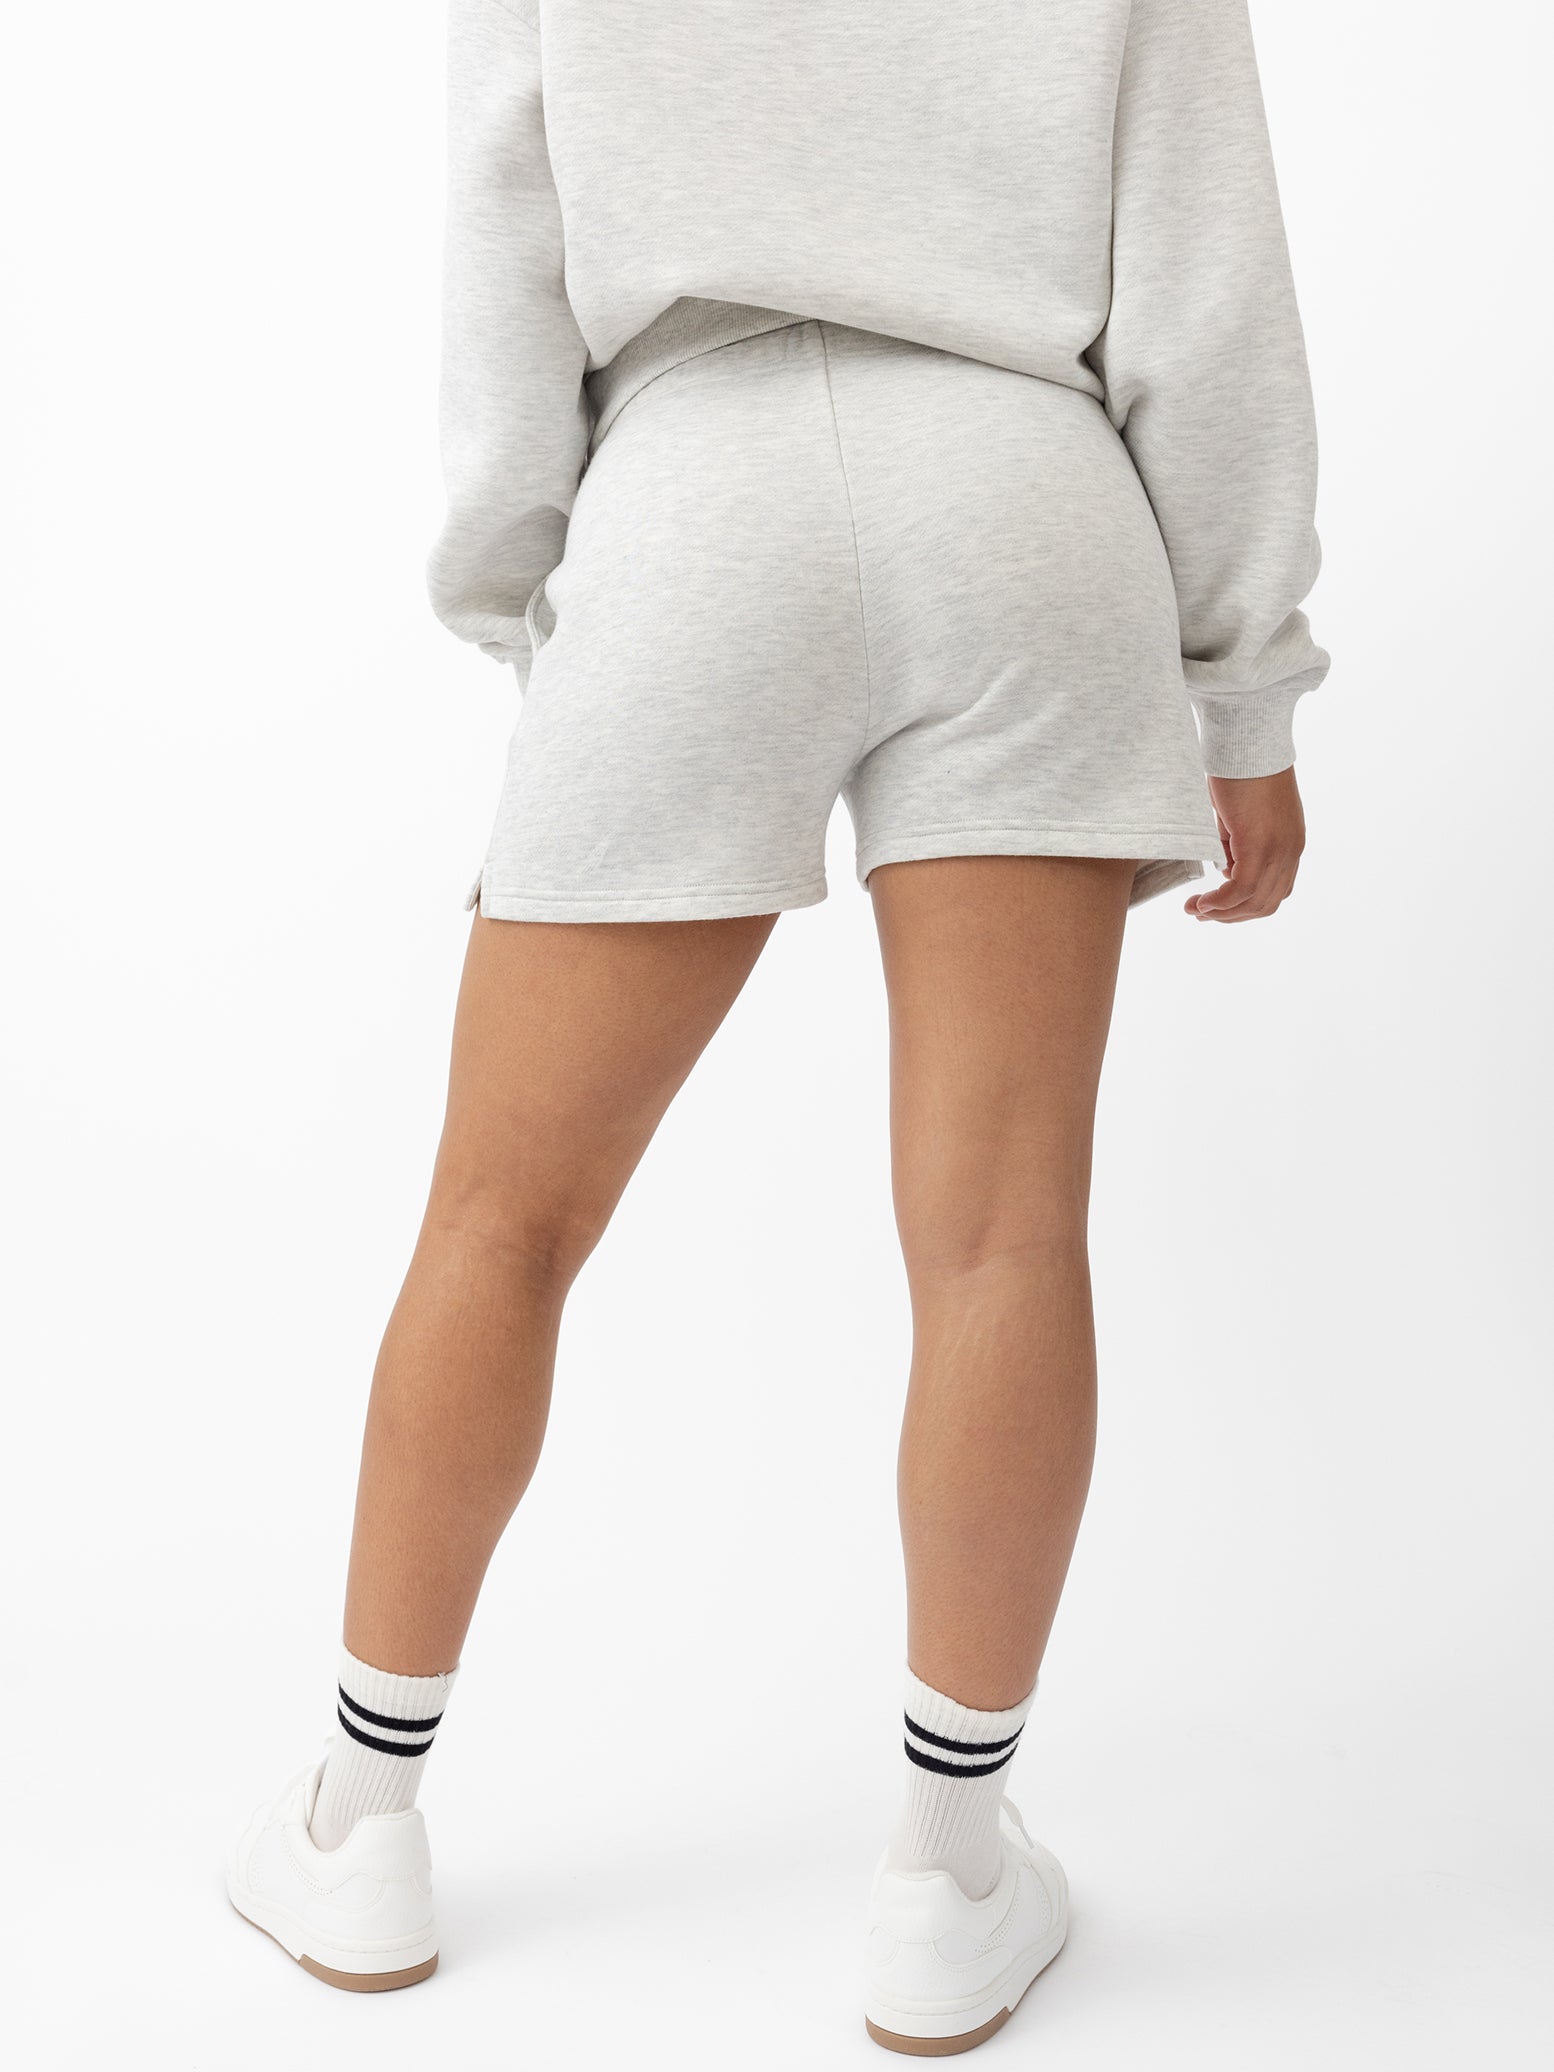 Heather Grey CityScape Shorts. The shorts are being worn by a female model in skate shoes. The background it a white background. 